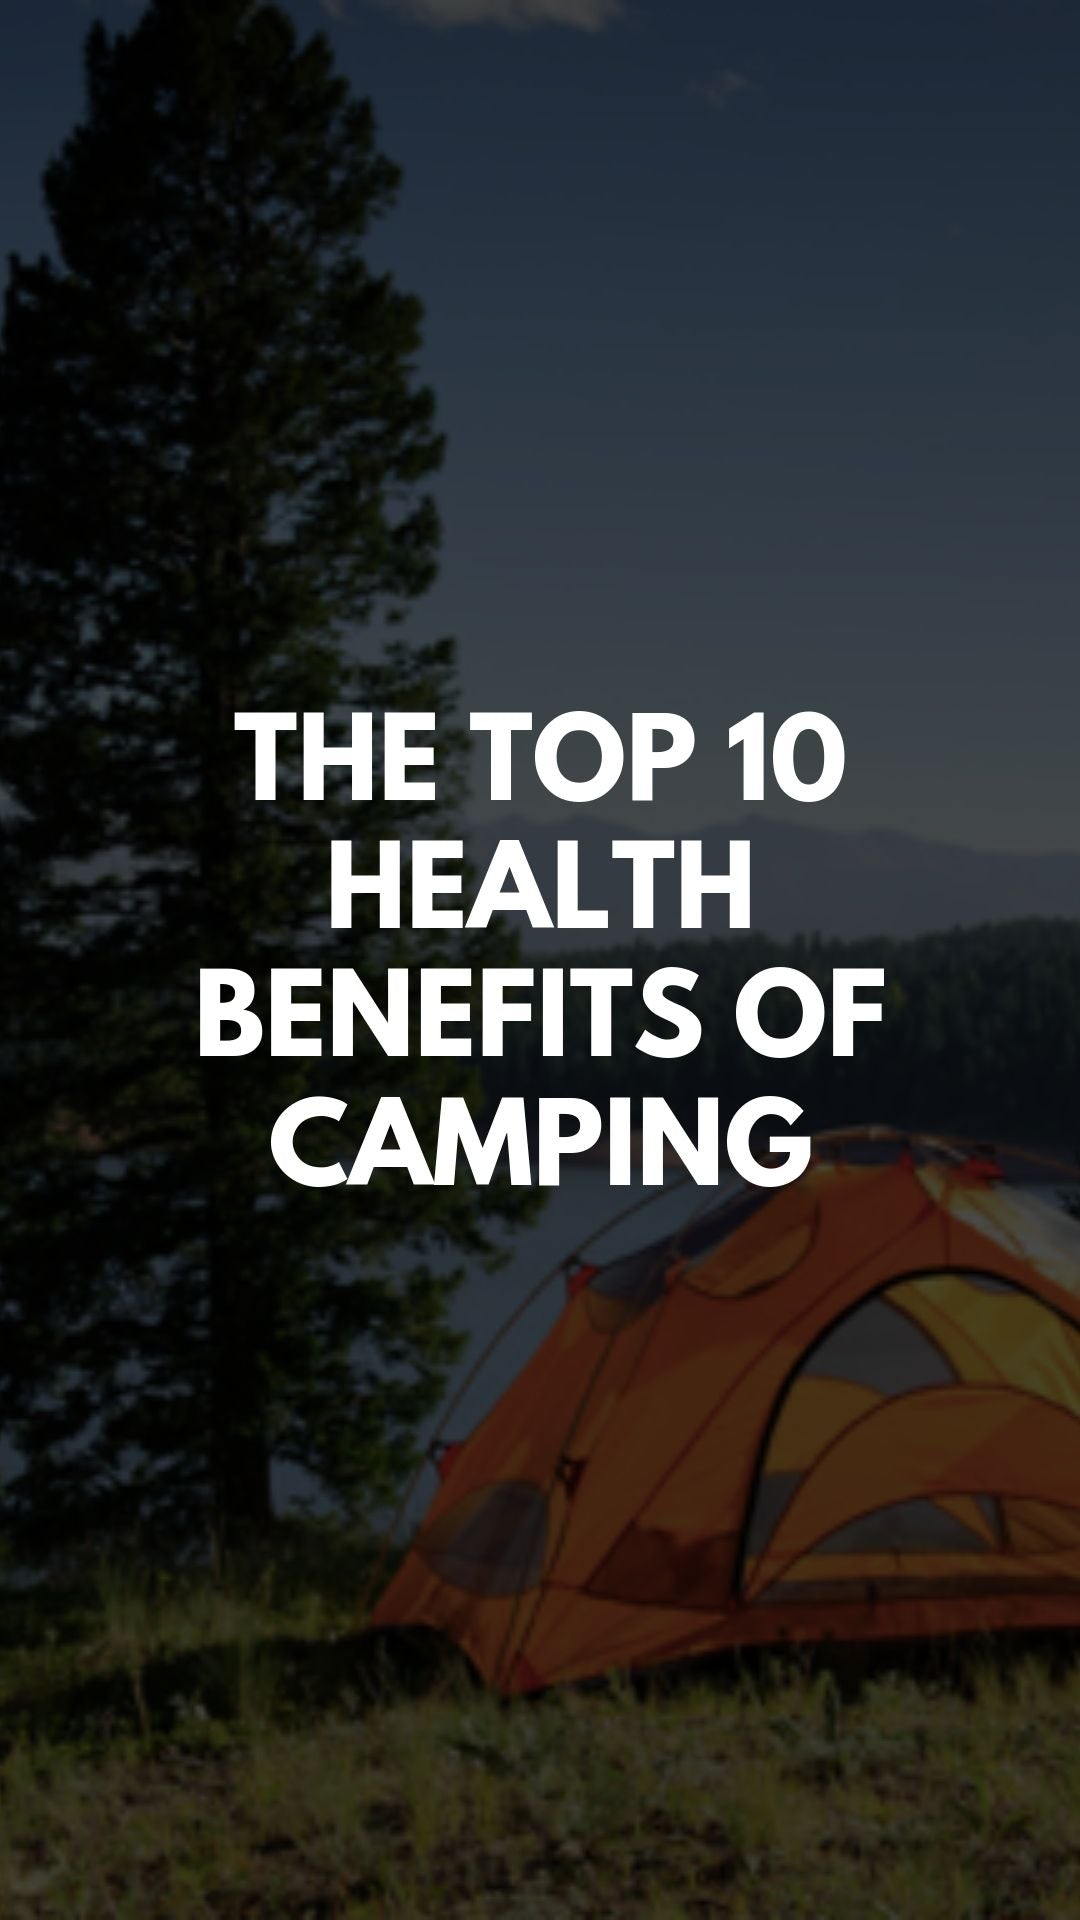 The Physical Benefits of Camping